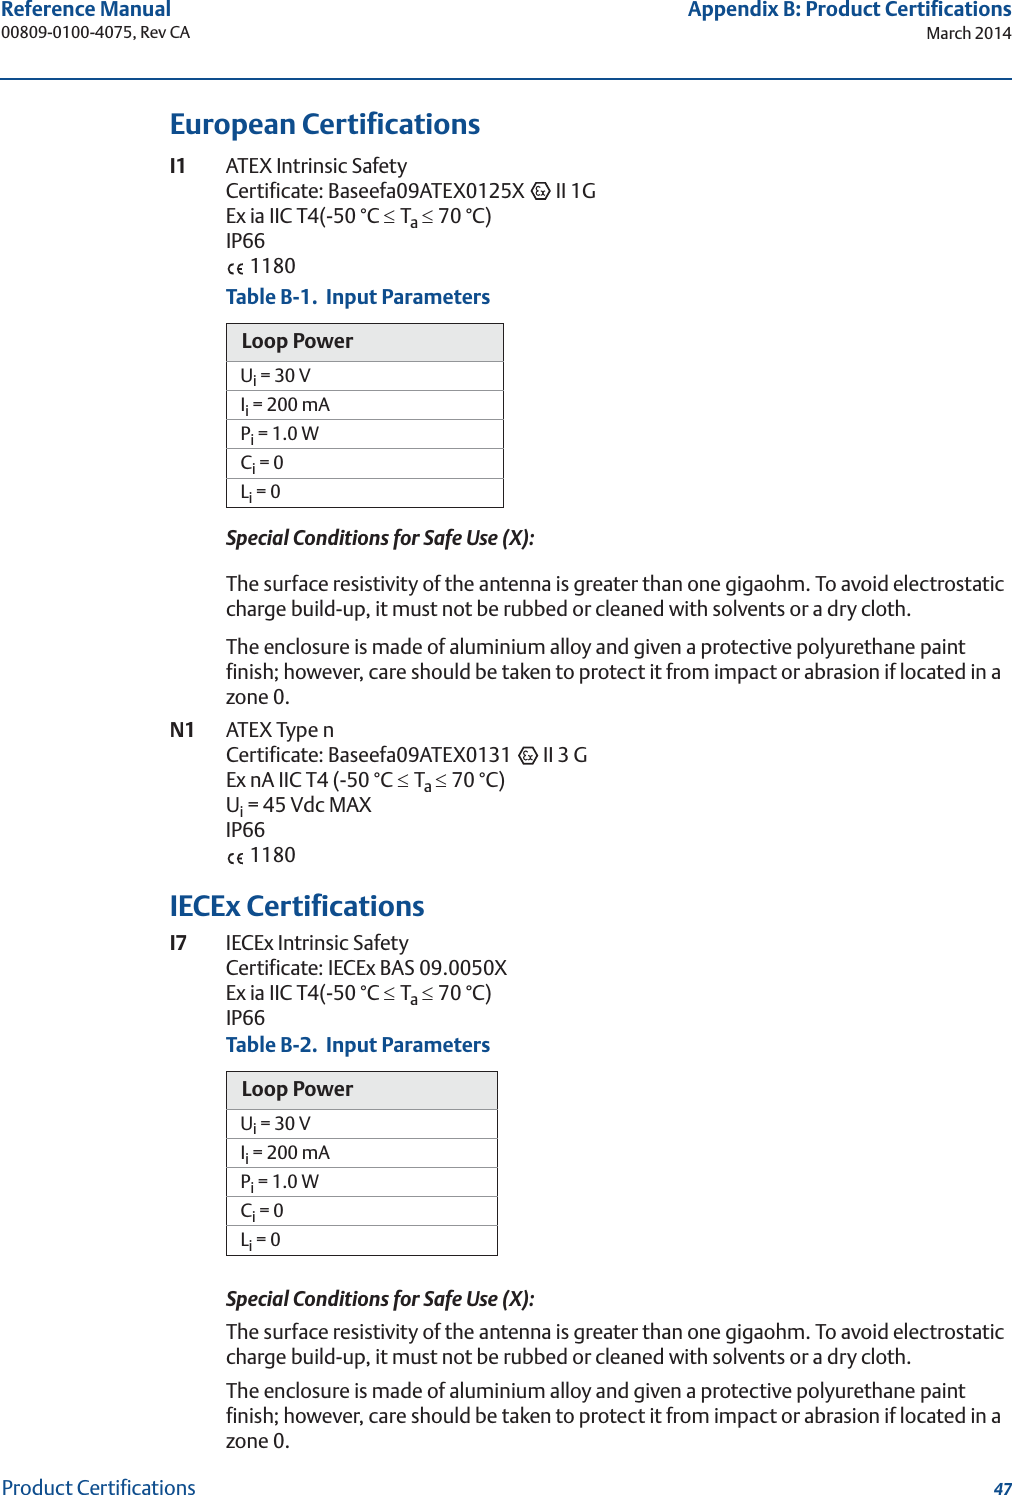 47Reference Manual 00809-0100-4075, Rev CAAppendix B: Product CertificationsMarch 2014Product CertificationsEuropean CertificationsI1 ATEX Intrinsic SafetyCertificate: Baseefa09ATEX0125X   II 1GEx ia IIC T4(-50 °C dTa d70 °C)IP66 1180Special Conditions for Safe Use (X):The surface resistivity of the antenna is greater than one gigaohm. To avoid electrostatic charge build-up, it must not be rubbed or cleaned with solvents or a dry cloth.The enclosure is made of aluminium alloy and given a protective polyurethane paint finish; however, care should be taken to protect it from impact or abrasion if located in a zone 0.N1  ATEX Type nCertificate: Baseefa09ATEX0131   II 3 GEx nA IIC T4 (-50 °C dTa d70 °C)Ui = 45 Vdc MAXIP66 1180IECEx CertificationsI7 IECEx Intrinsic SafetyCertificate: IECEx BAS 09.0050XEx ia IIC T4(-50 °C dTa d70 °C)IP66Special Conditions for Safe Use (X):The surface resistivity of the antenna is greater than one gigaohm. To avoid electrostatic charge build-up, it must not be rubbed or cleaned with solvents or a dry cloth.The enclosure is made of aluminium alloy and given a protective polyurethane paint finish; however, care should be taken to protect it from impact or abrasion if located in a zone 0.Table B-1.  Input ParametersLoop PowerUi = 30 VIi = 200 mAPi = 1.0 WCi = 0Li = 0Table B-2.  Input ParametersLoop PowerUi = 30 VIi = 200 mAPi = 1.0 WCi = 0Li = 0